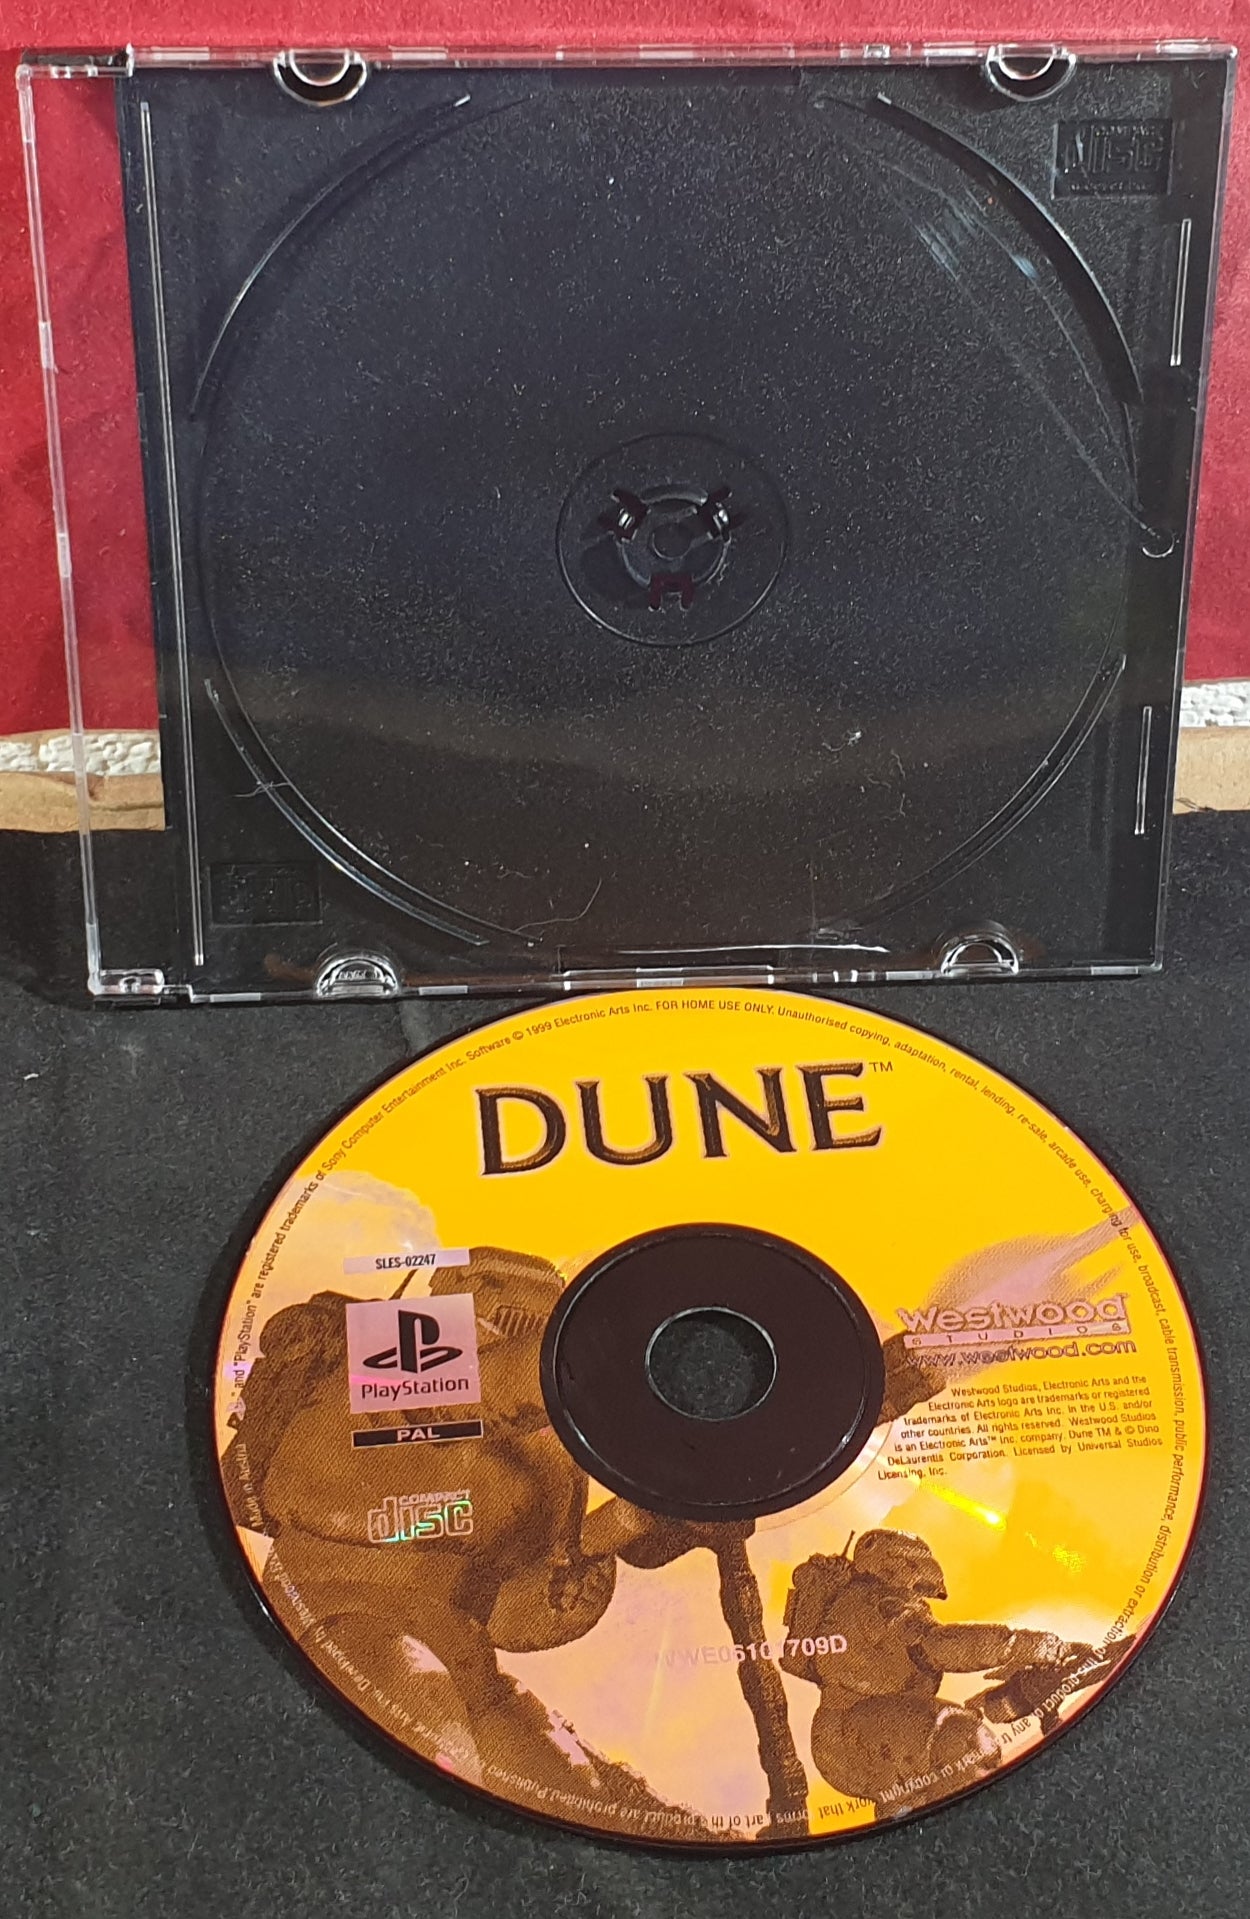 Dune Sony Playstation 1 (PS1) Game Disc Only